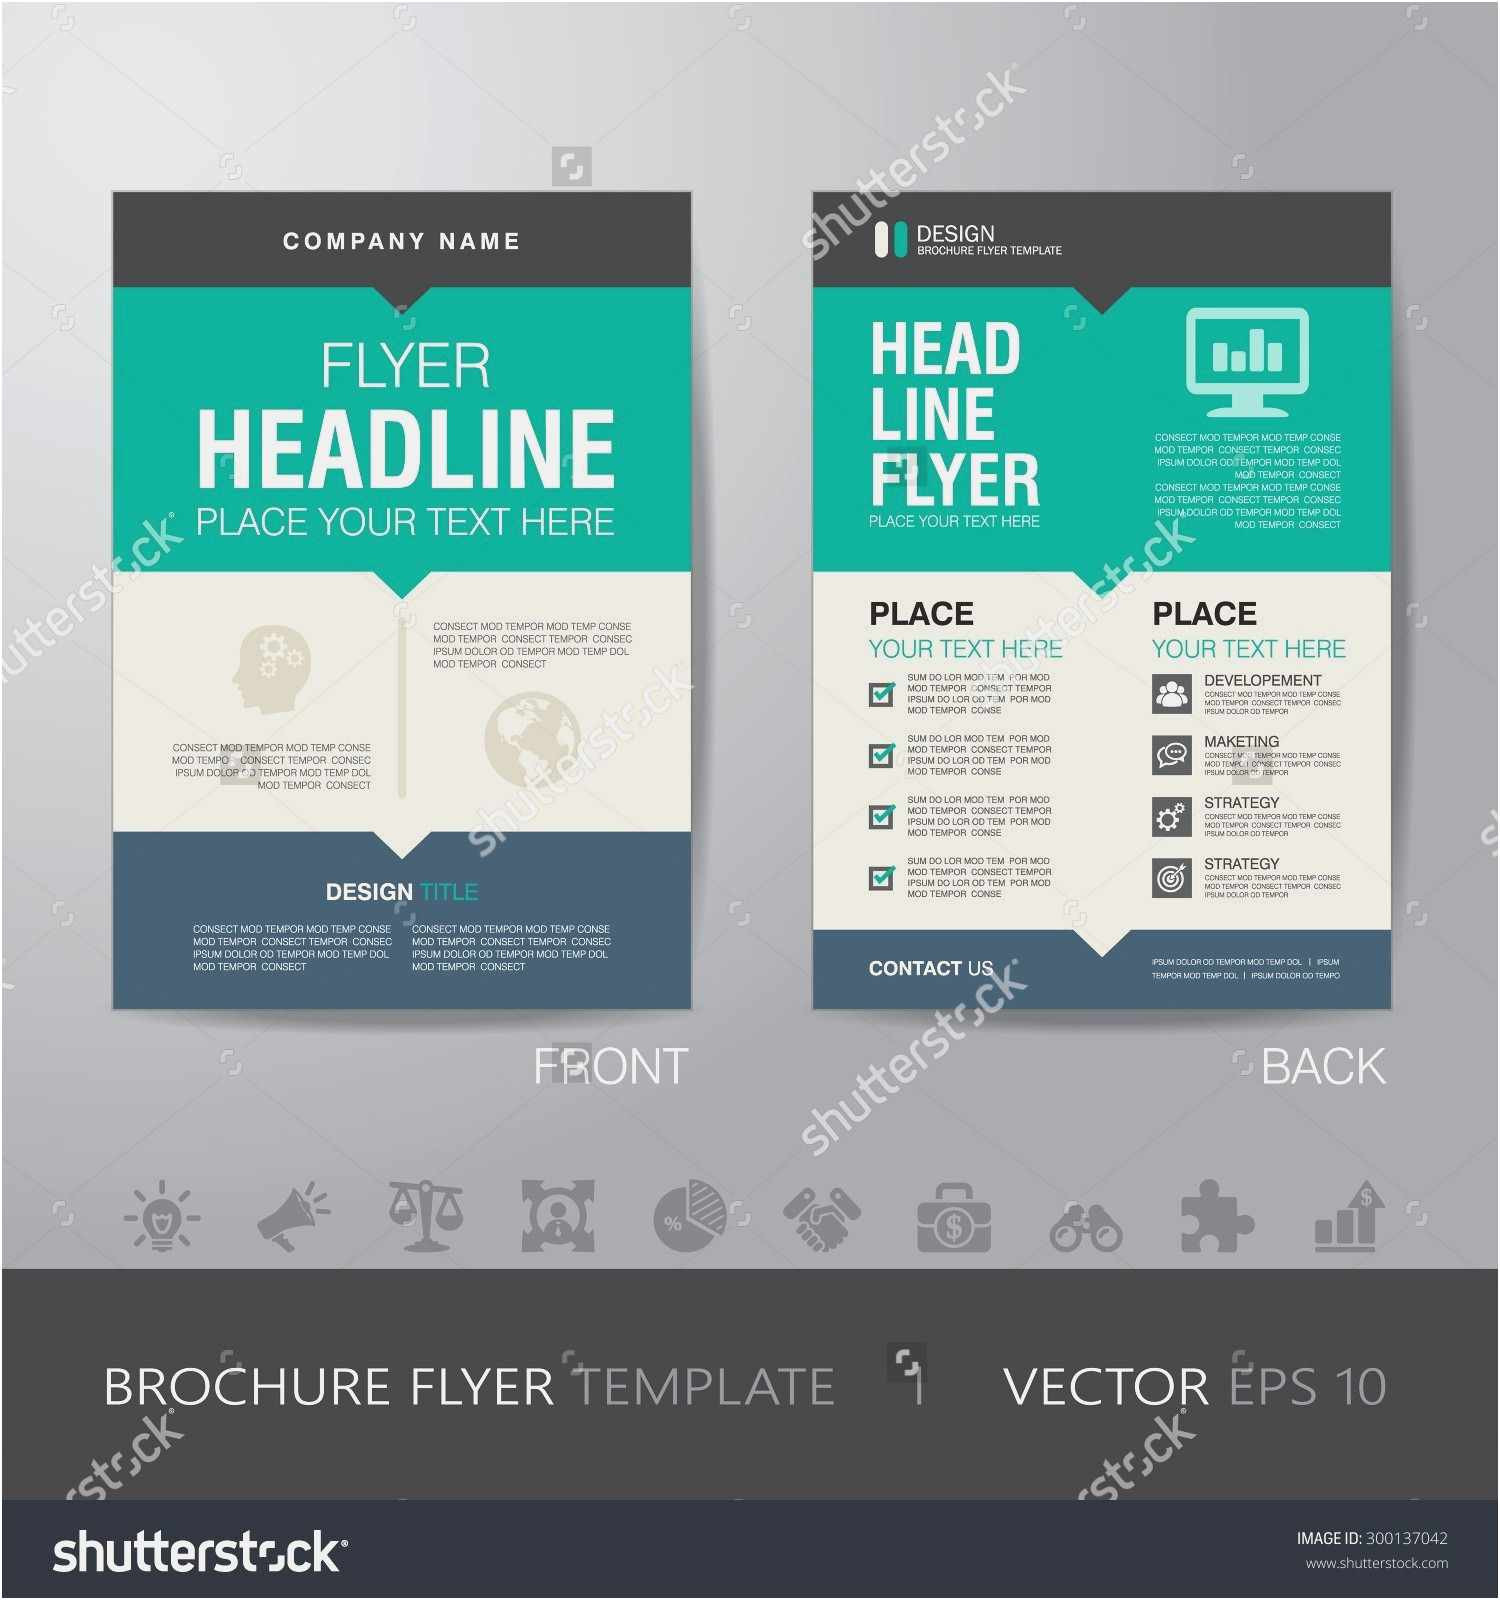 Free Collection 54 Free Business Card Templates Professional Of Avery Templates 8371 Business Cards